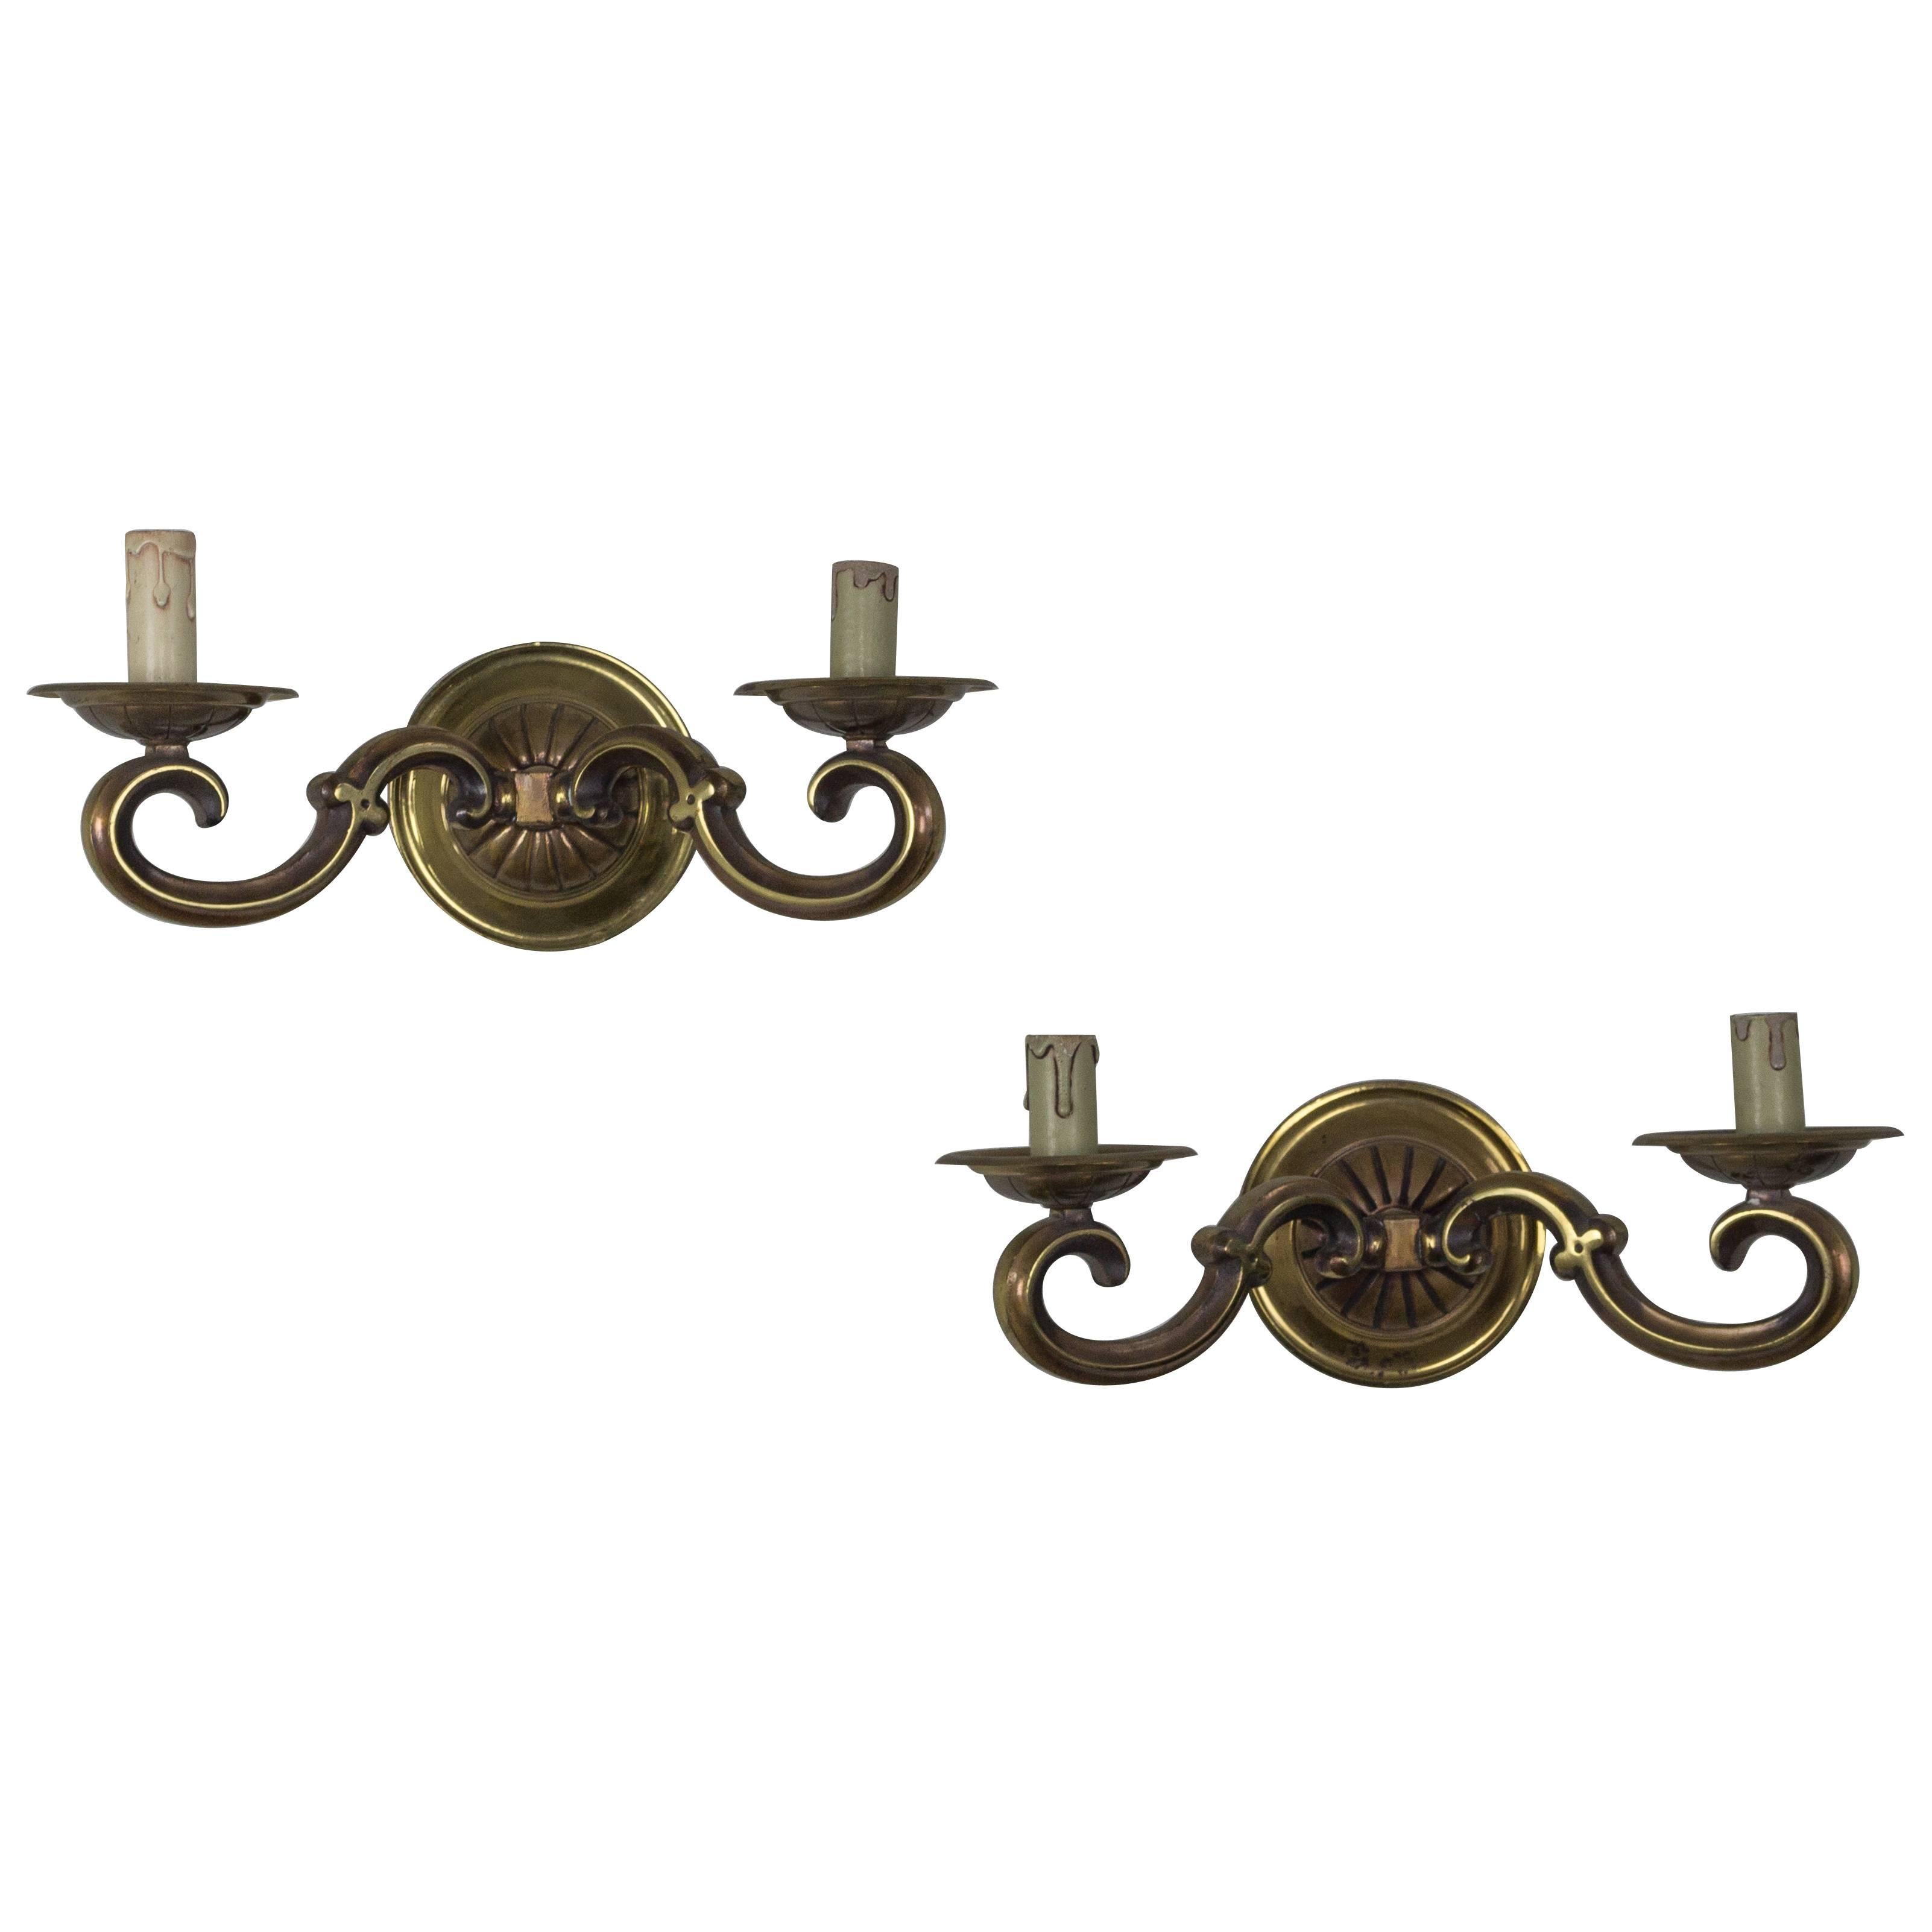 Pair of French 1940s Gilt Bronze Sconces For Sale